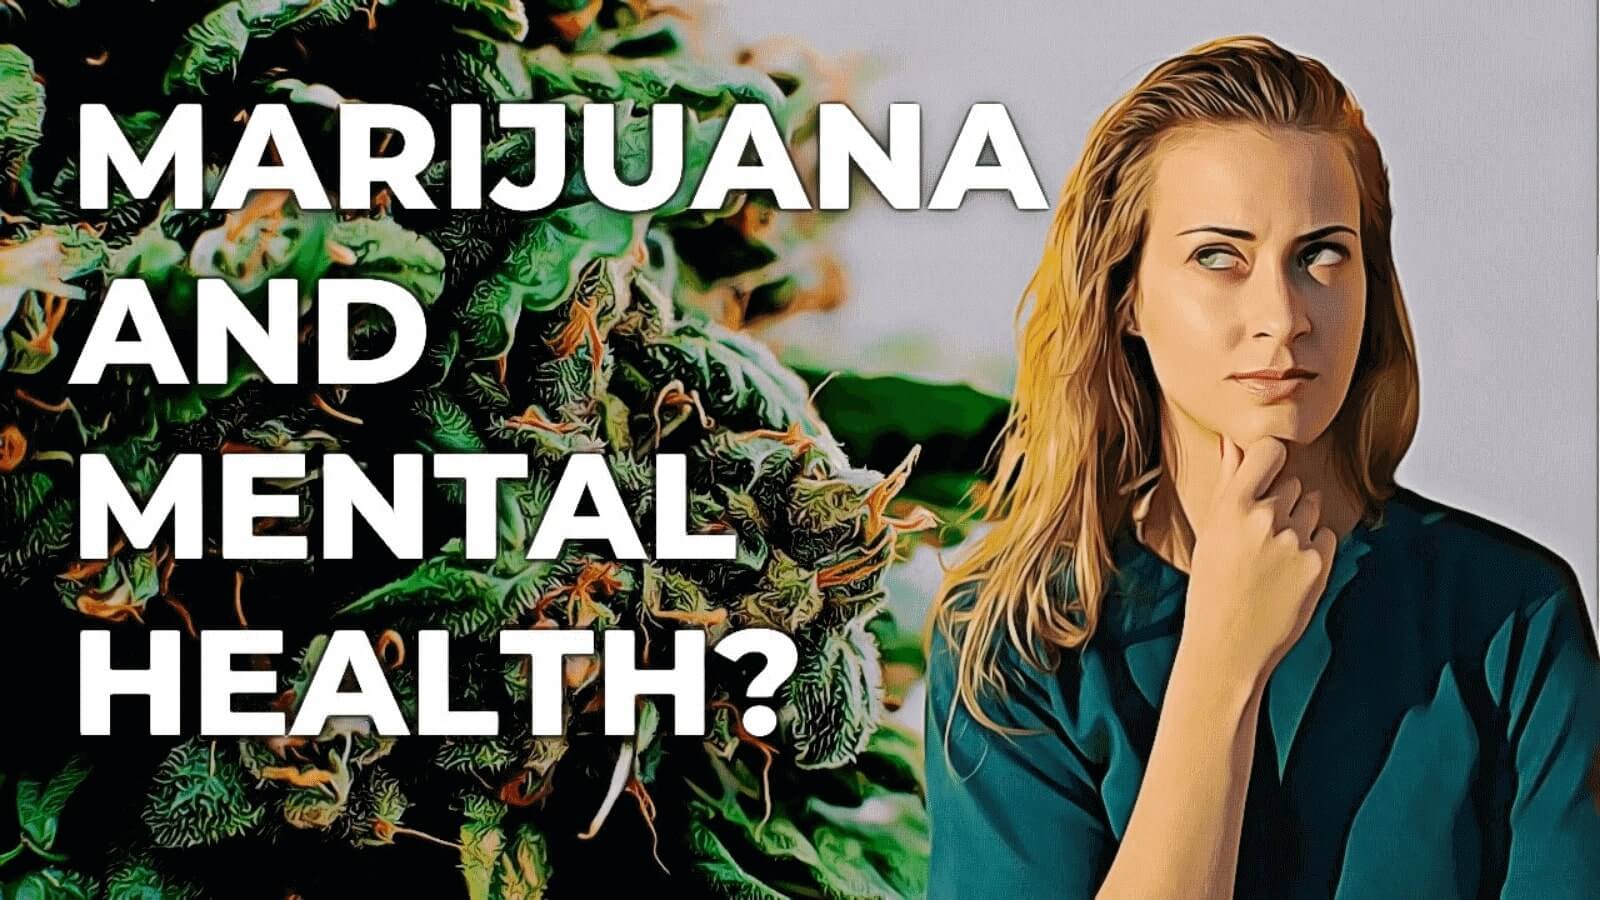 Marijuana and mental health text next to an image of a female young adult wondering